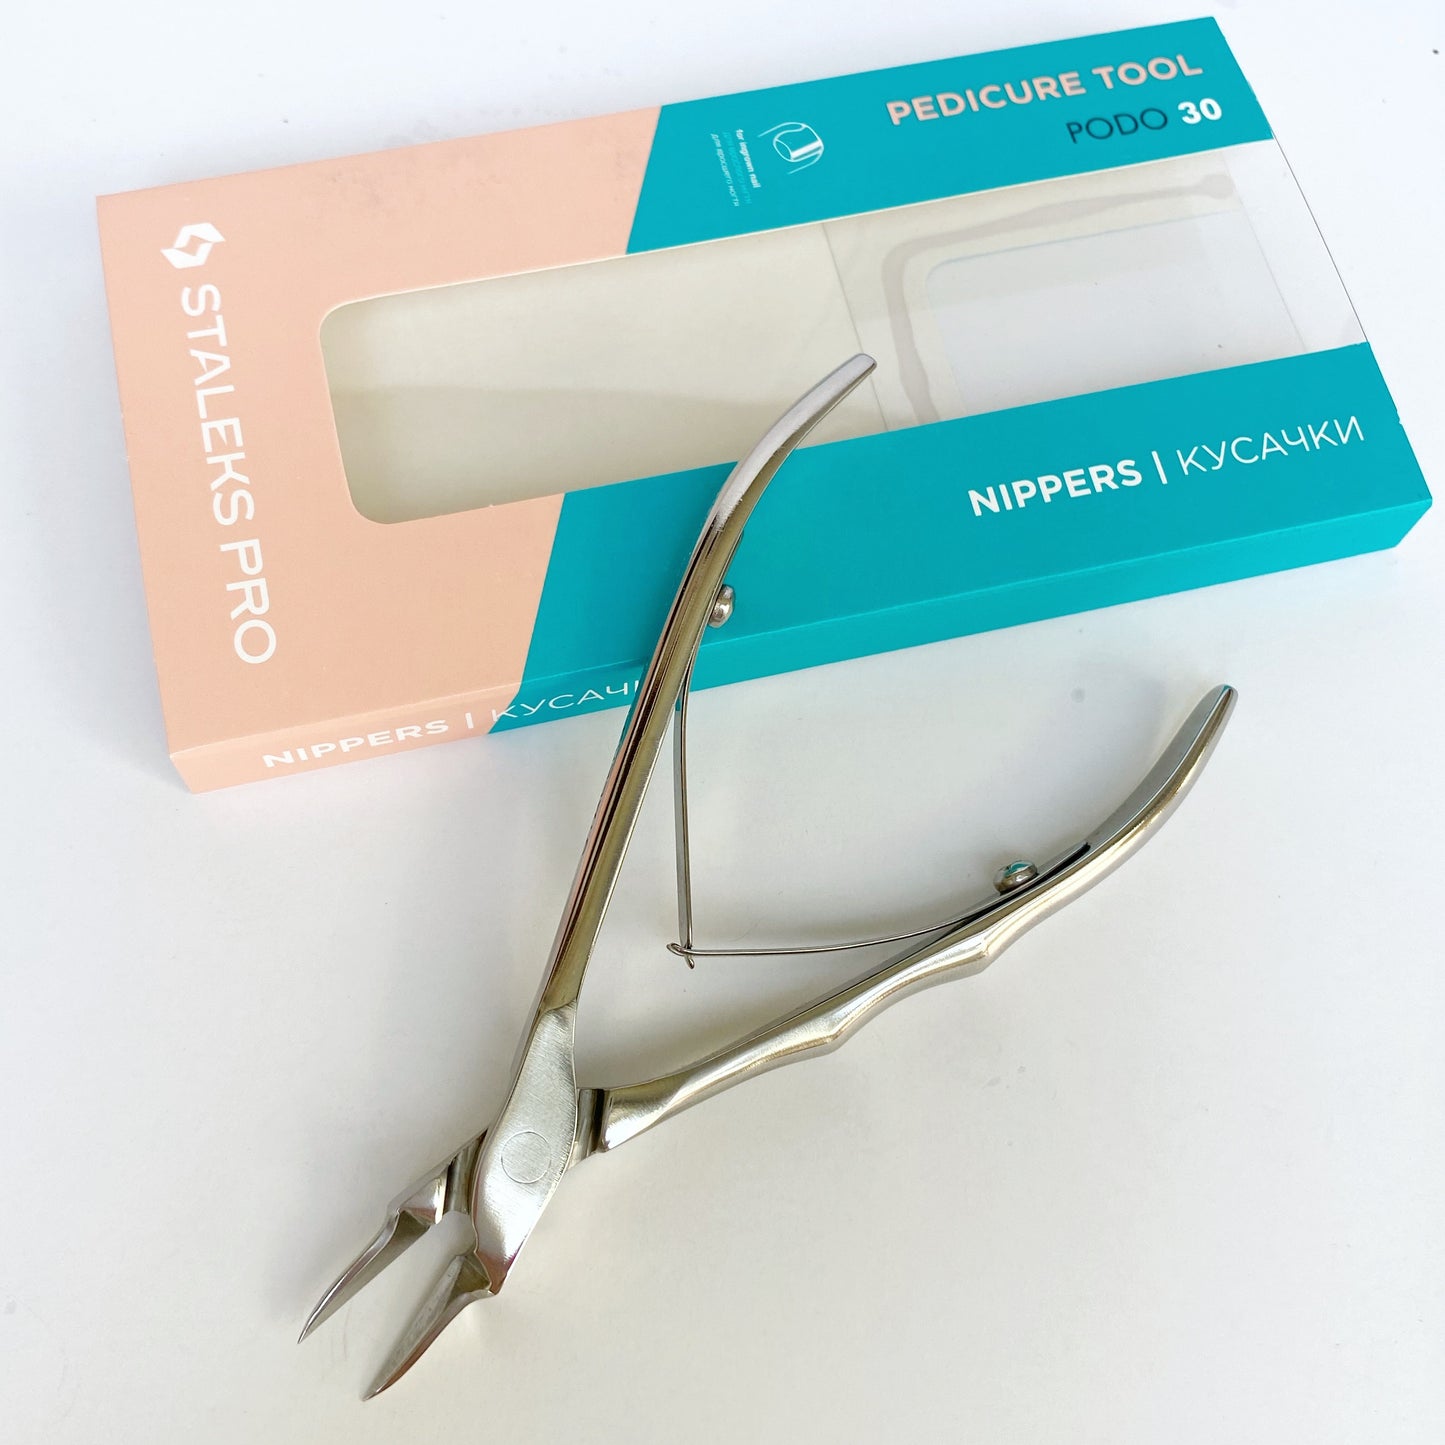 STALEKS PRO Pedicure Nippers for Ingrown Nails, PODO30 (NP-30-18)